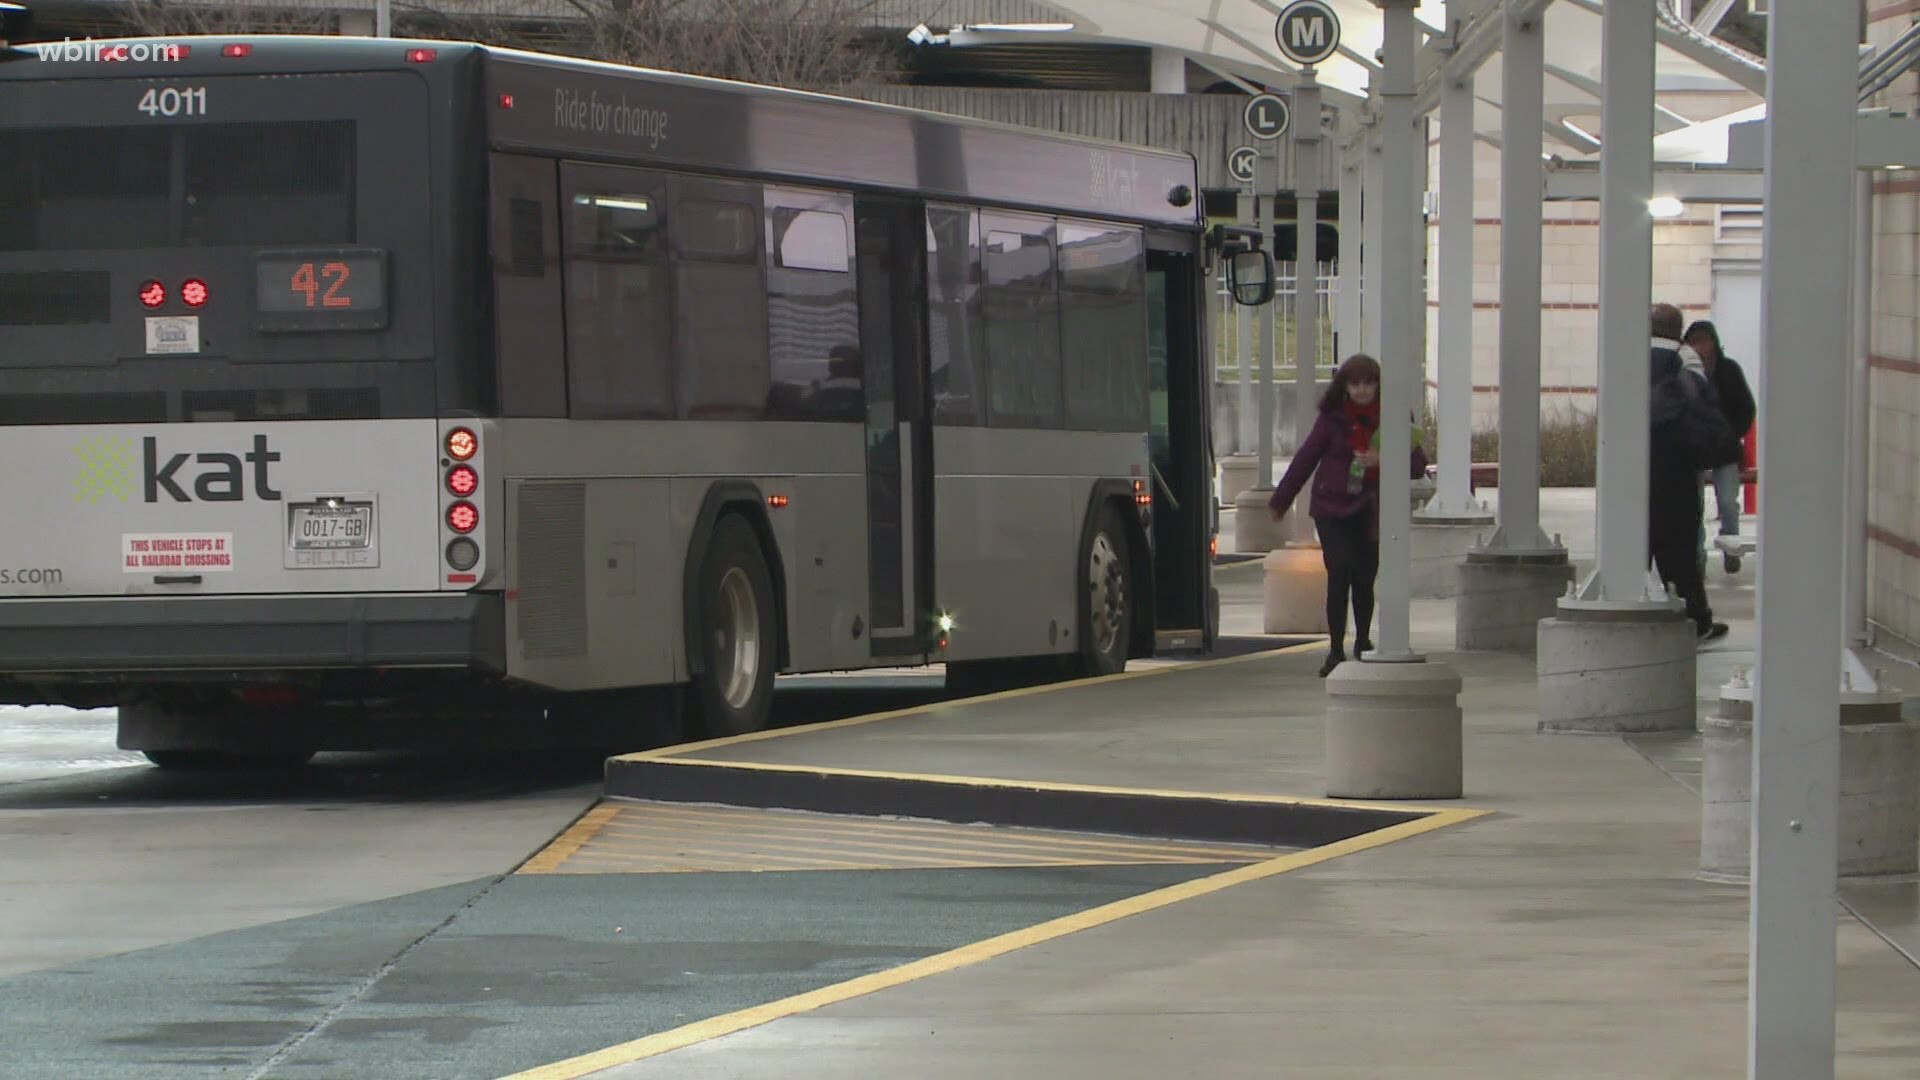 Starting today, you'll notice some KAT buses making fewer weekday trips.